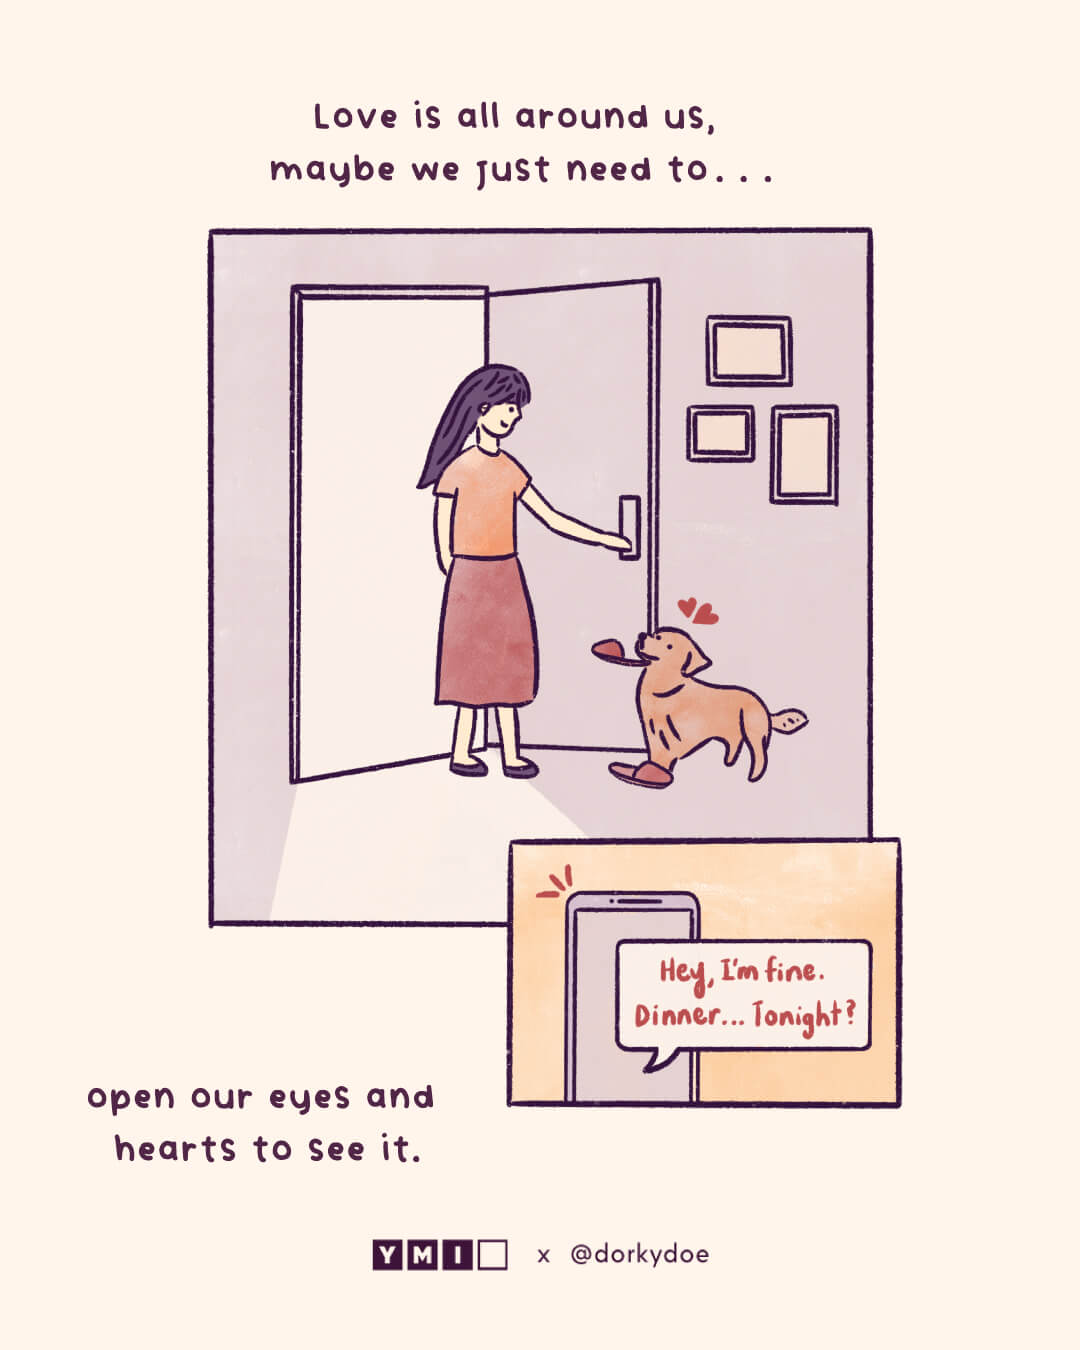 She opens door and see her dog, at the same time the message comes in.